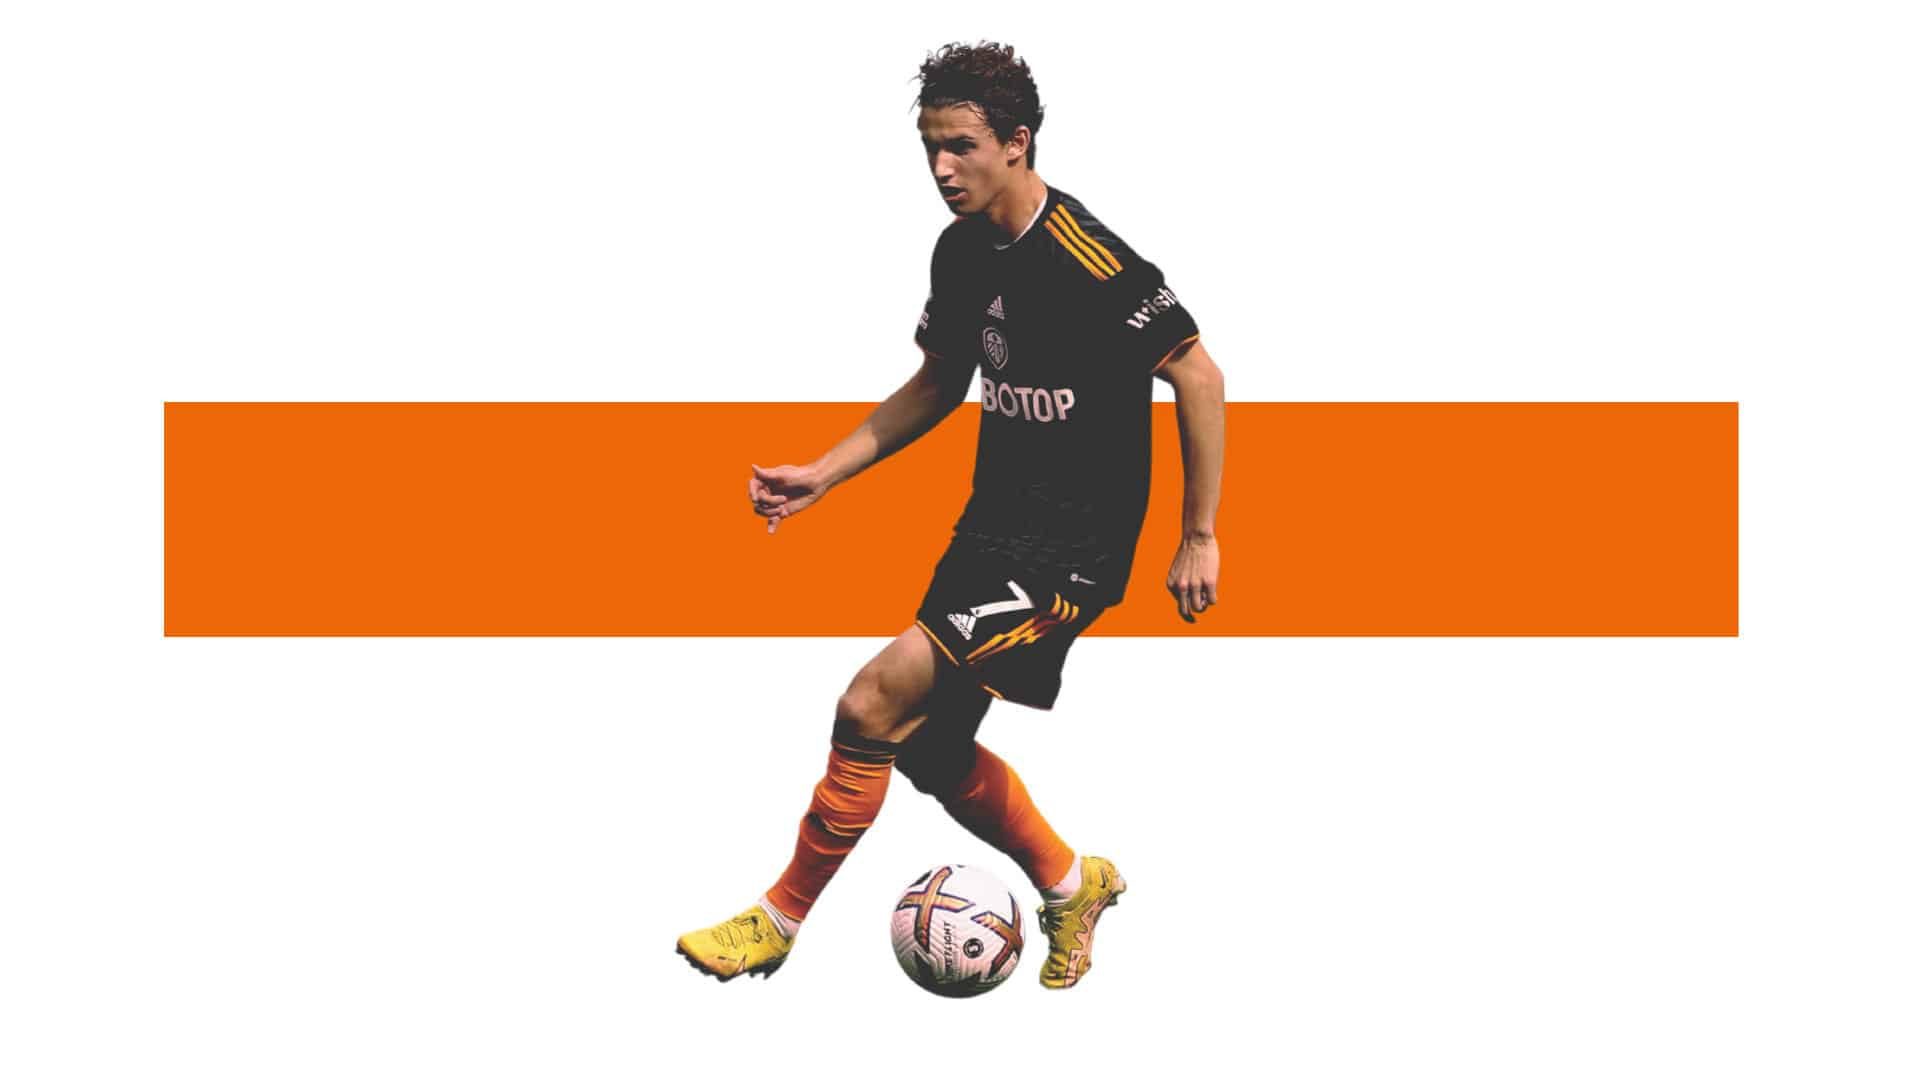 Brenden Aaronson playing in the black and orange away kit, against a white back drop with a horizontal orange bar running across